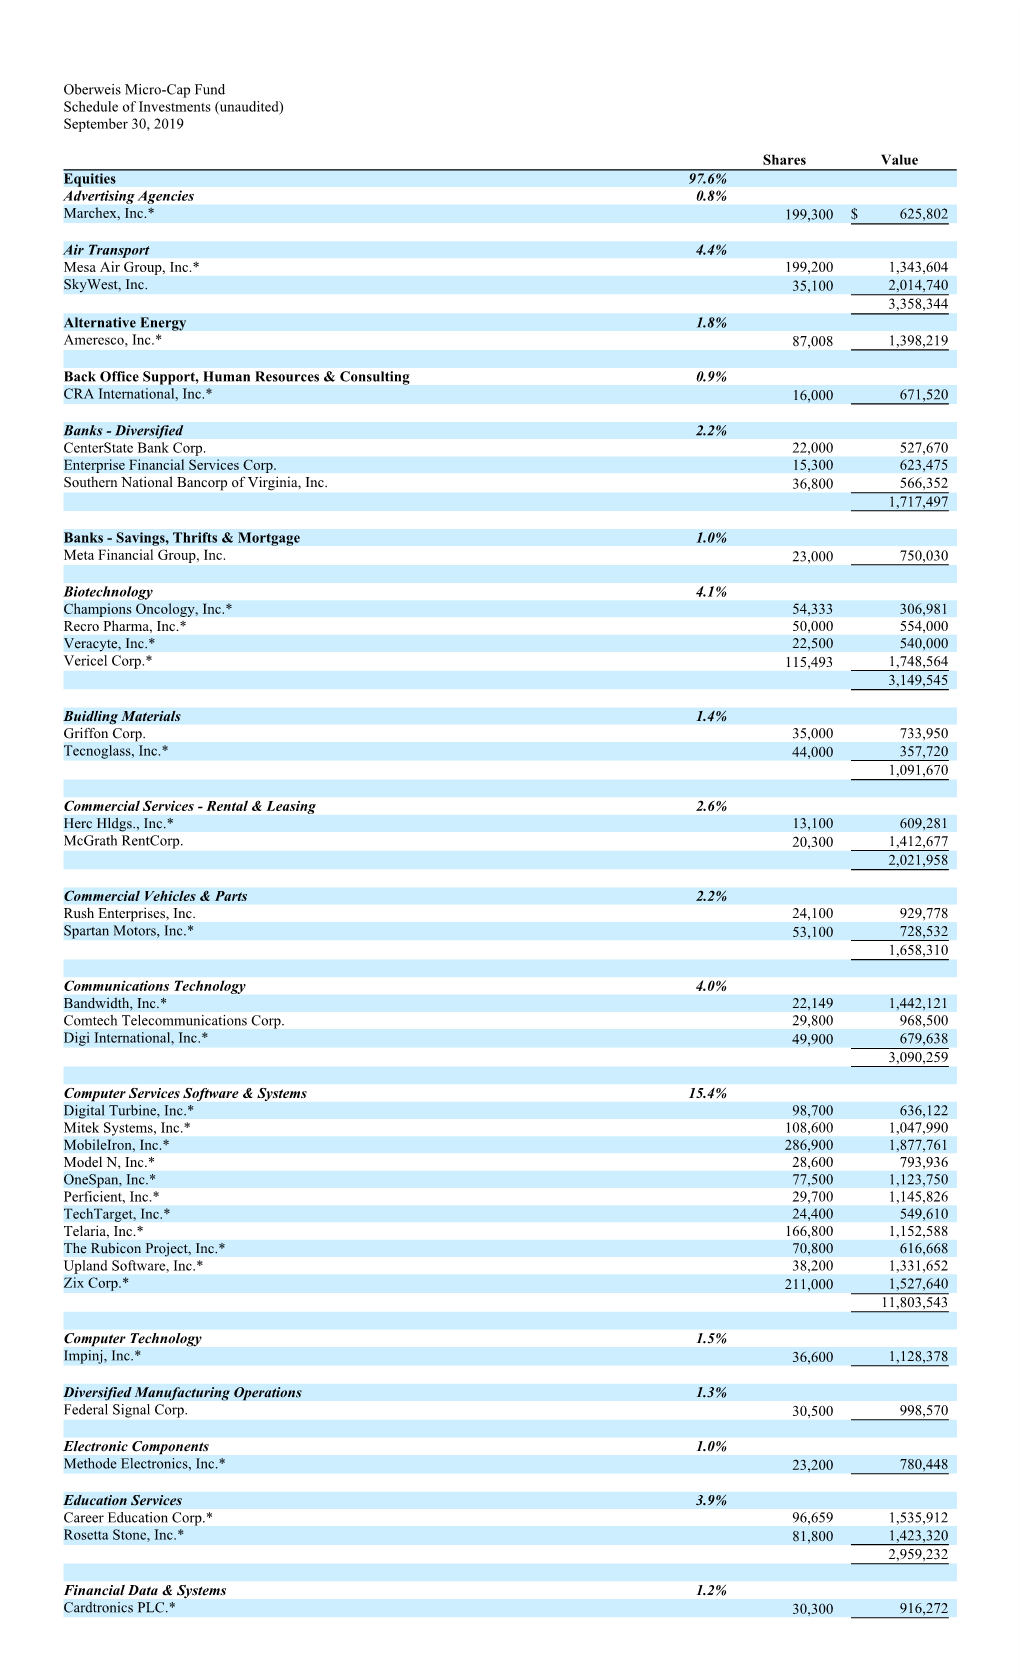 Oberweis Micro-Cap Fund Schedule of Investments (Unaudited) September 30, 2019